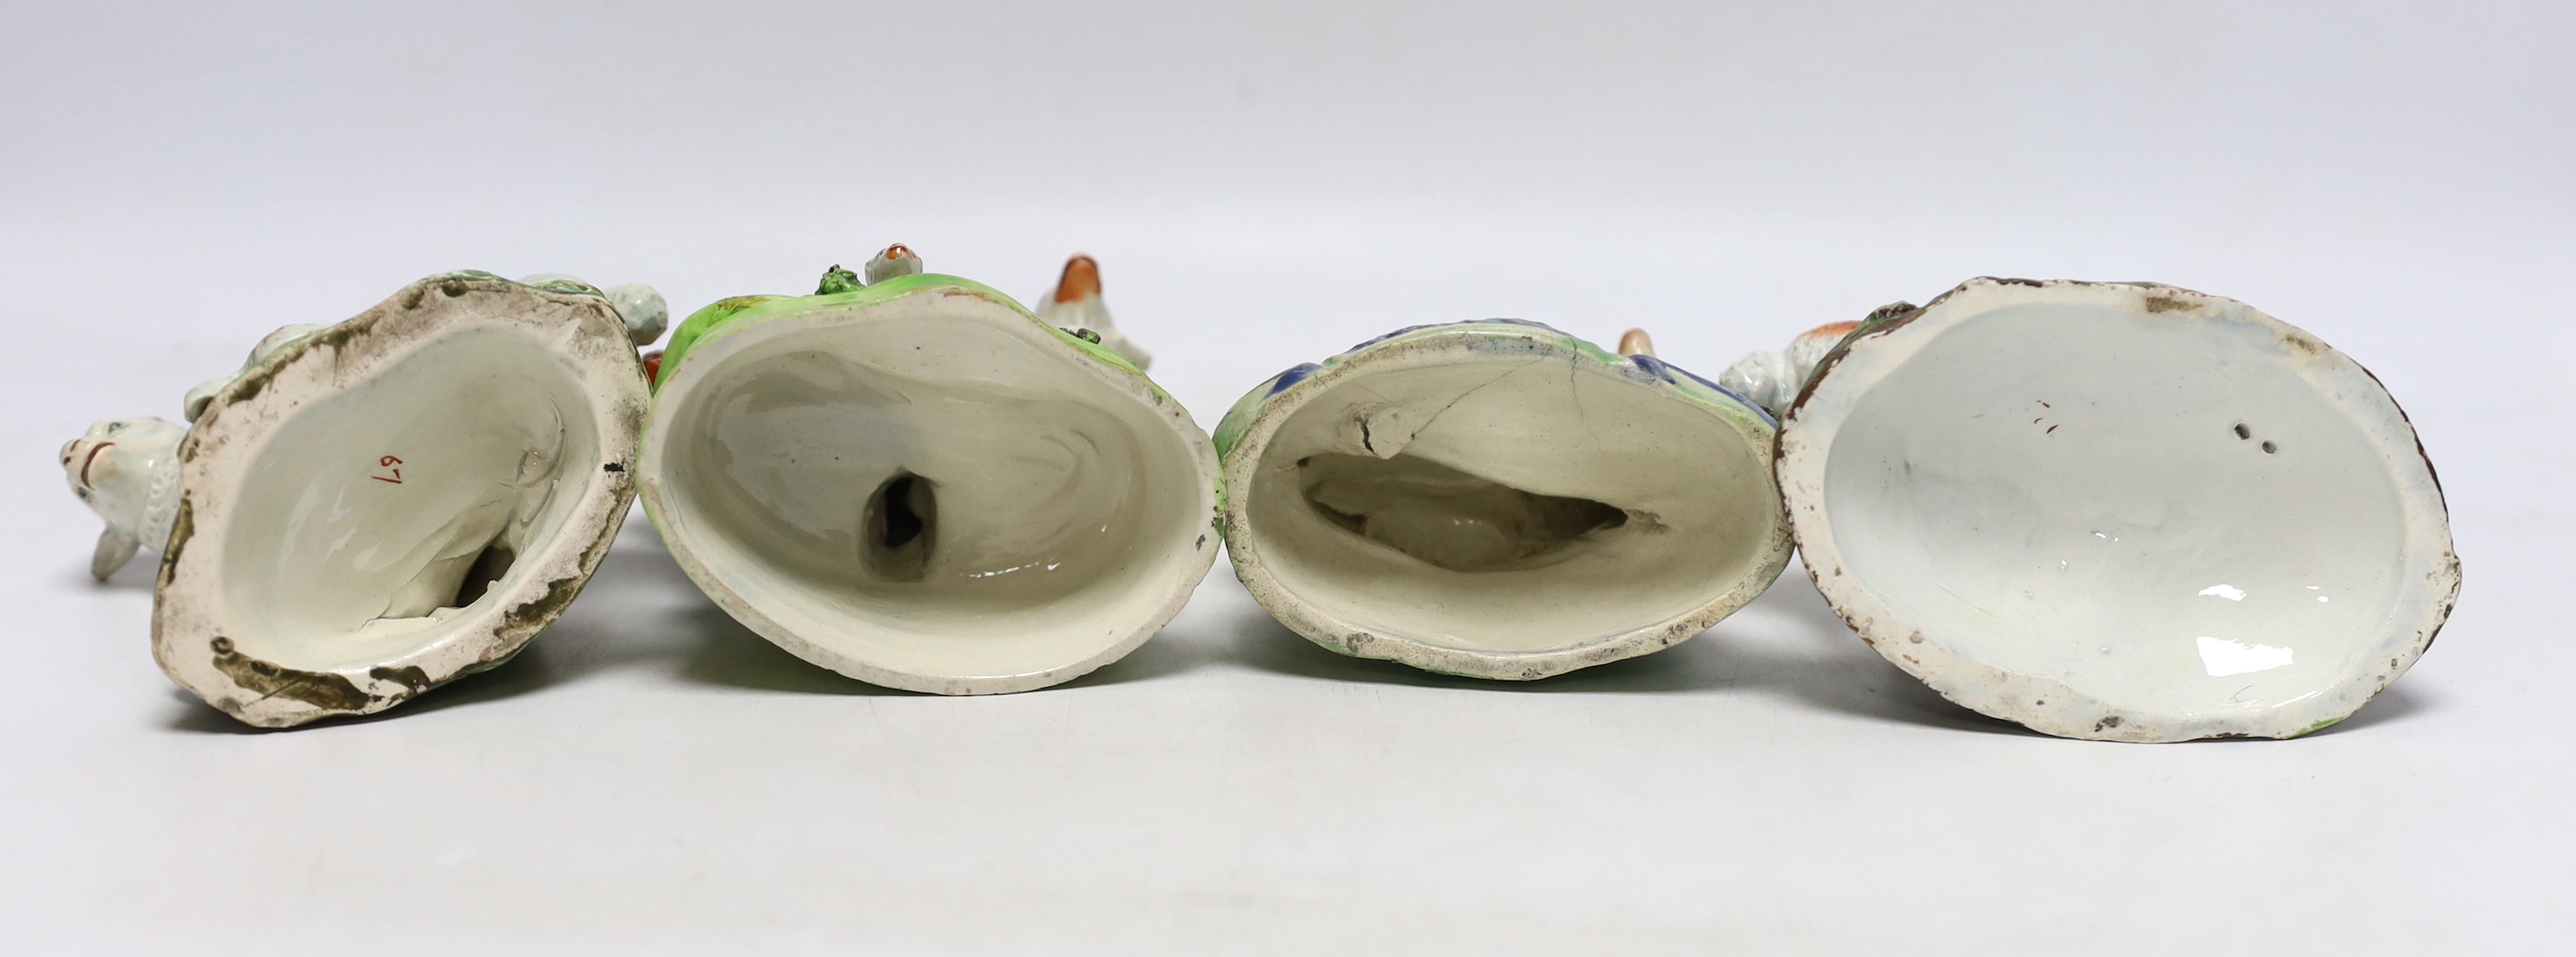 Four Staffordshire pearlware figures of sheep, c.1820-30, one with rare initials ‘PW’ to its back, largest 15cm high